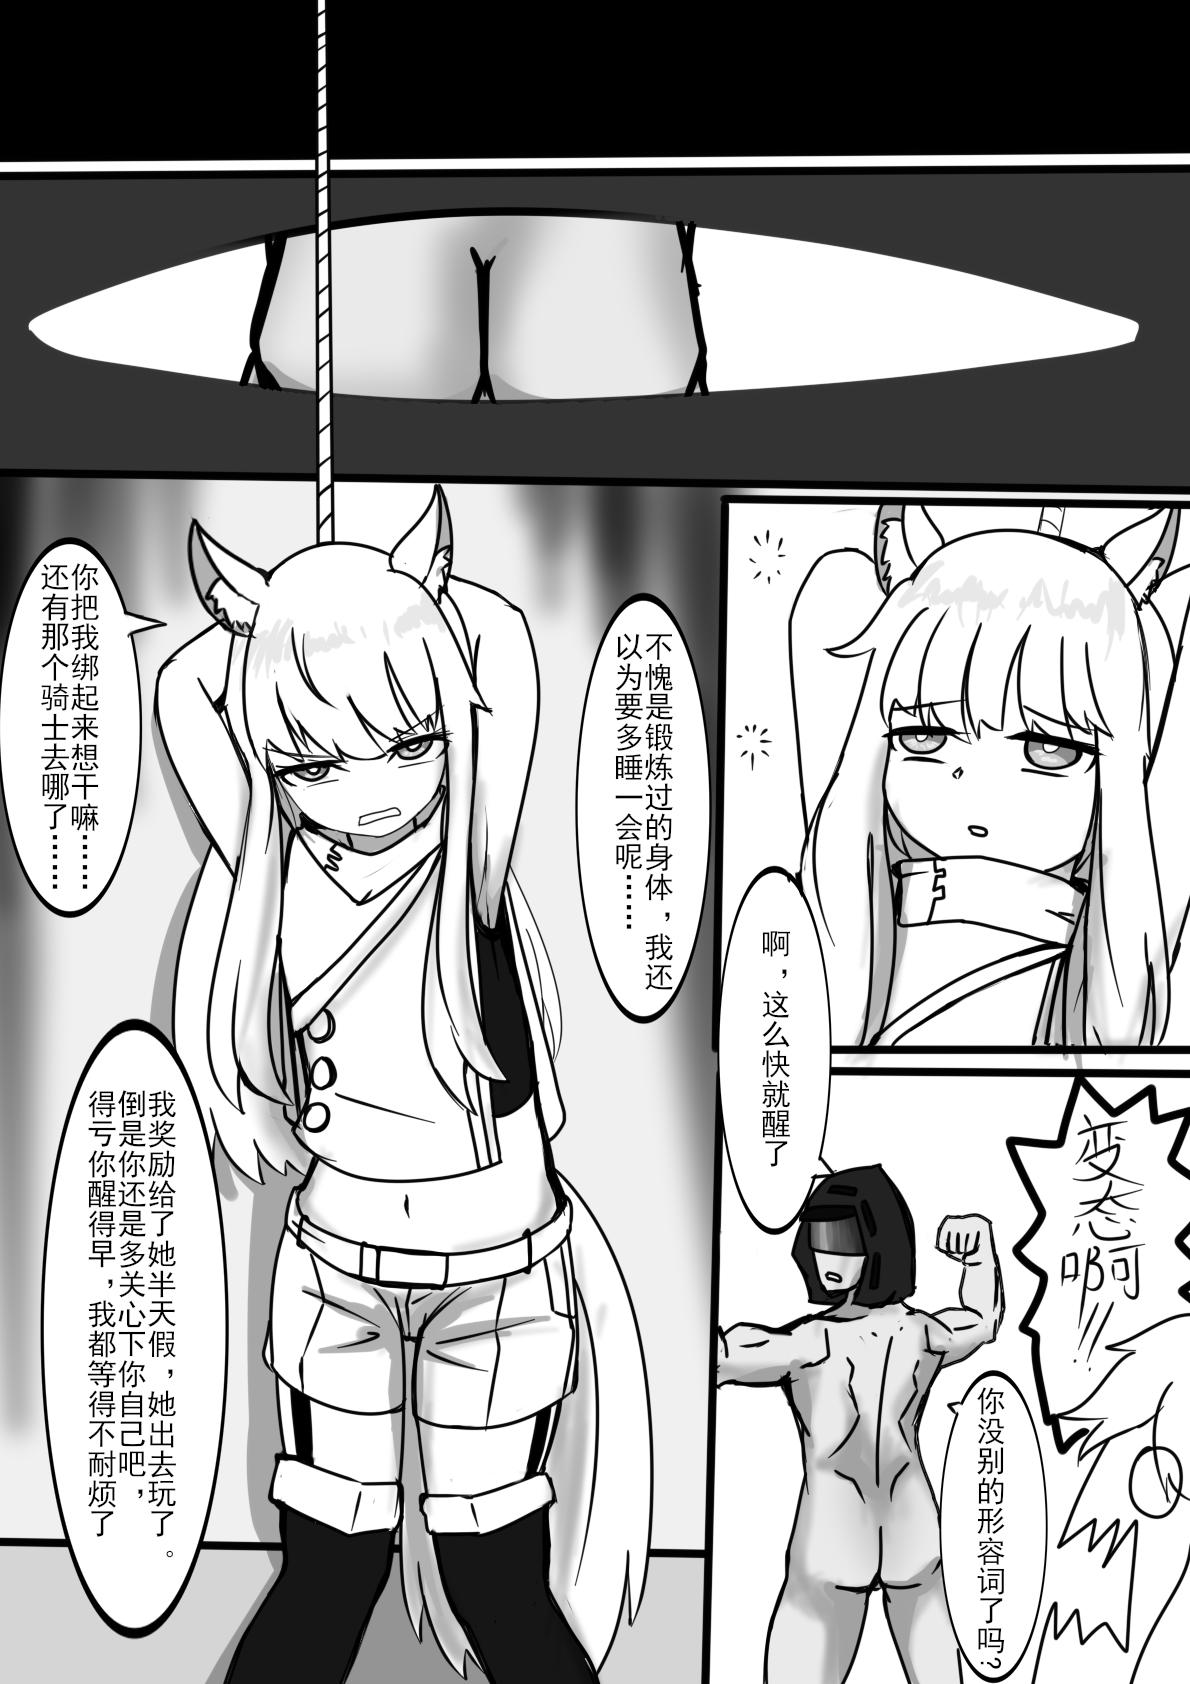 Brazil 白马？ - Arknights Transsexual - Page 11